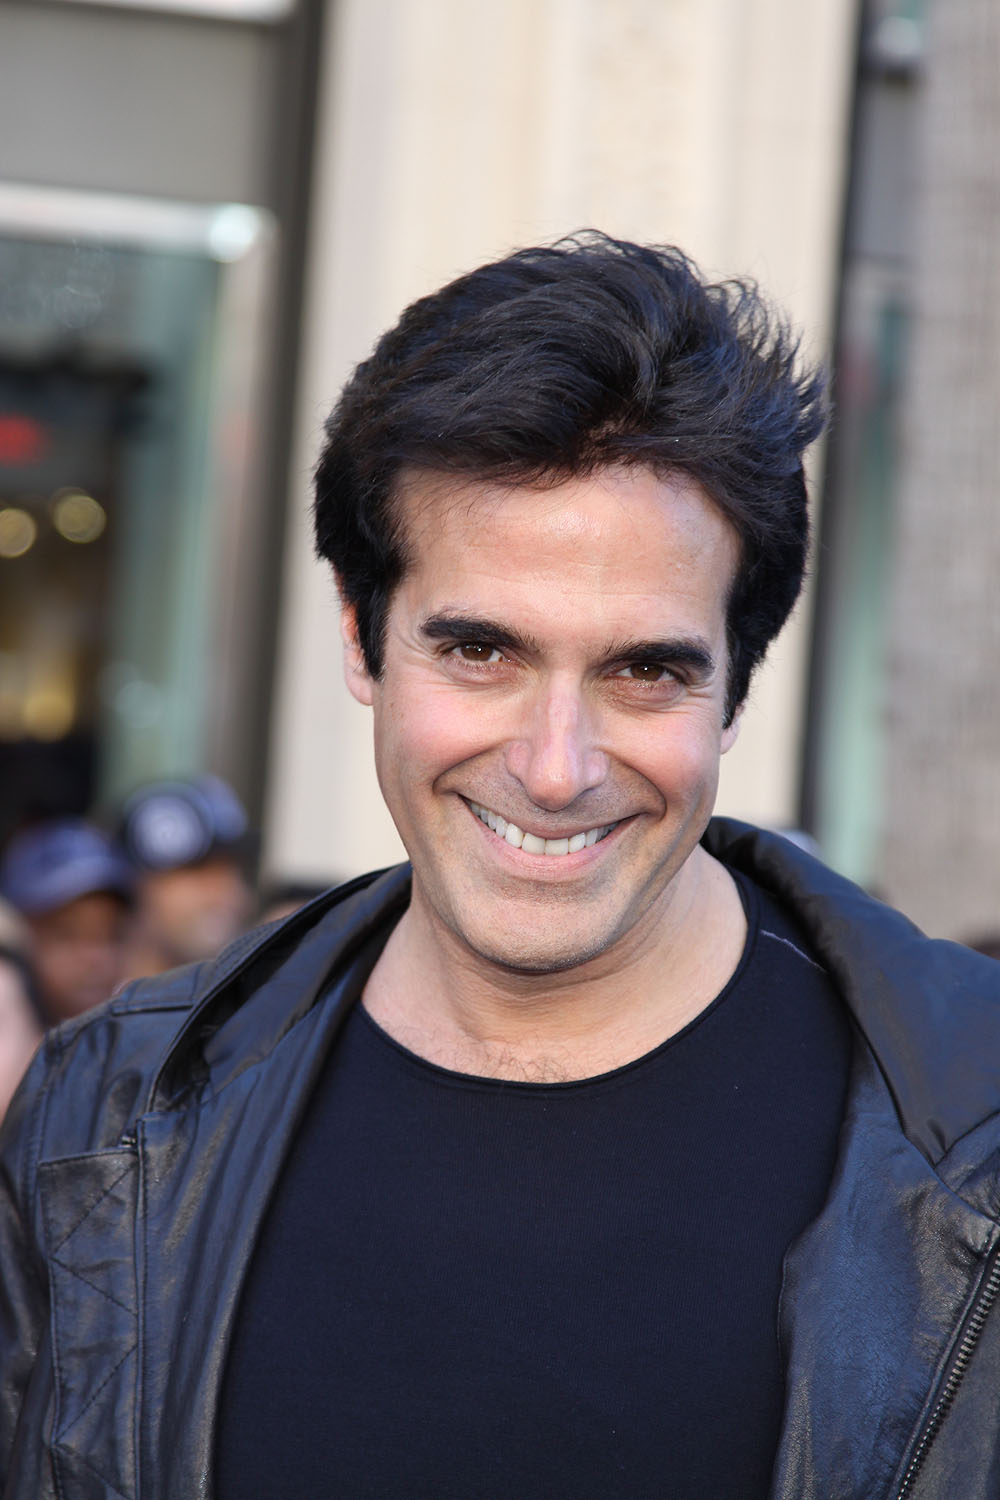 david-copperfield-illusionist-young